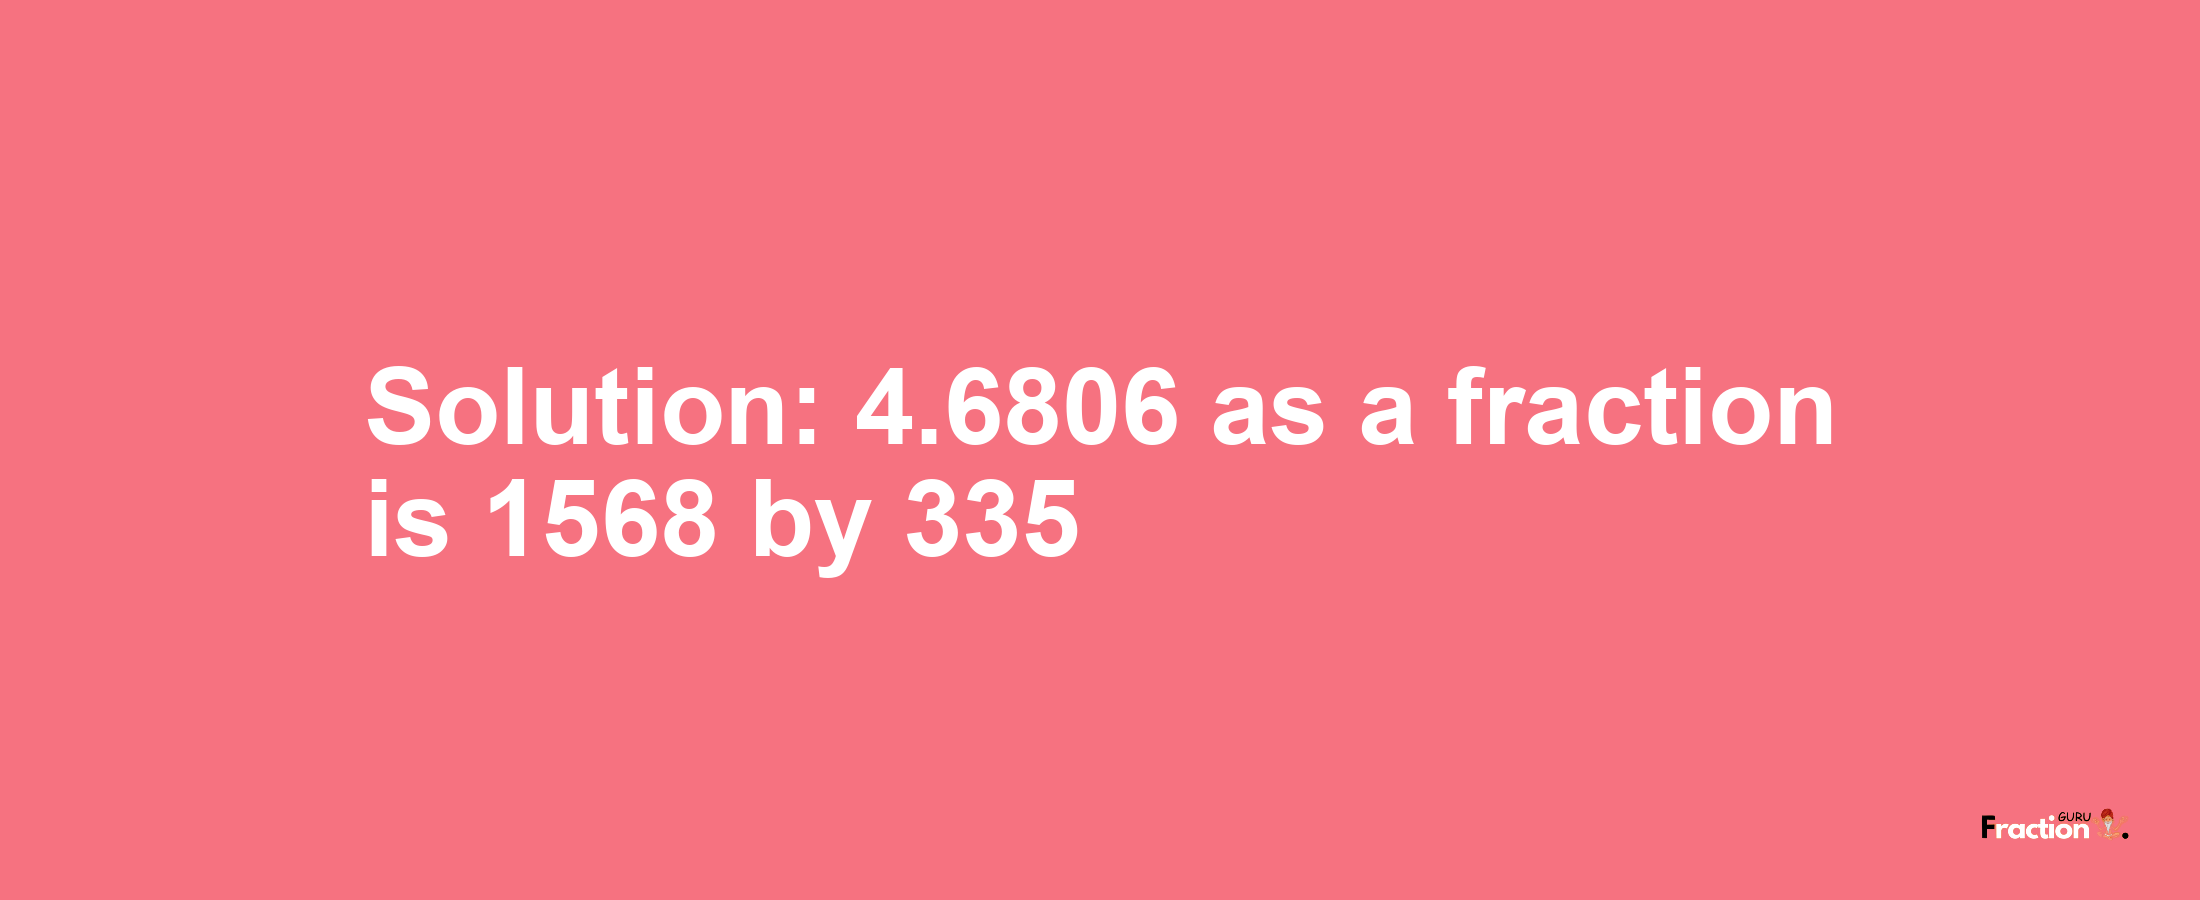 Solution:4.6806 as a fraction is 1568/335